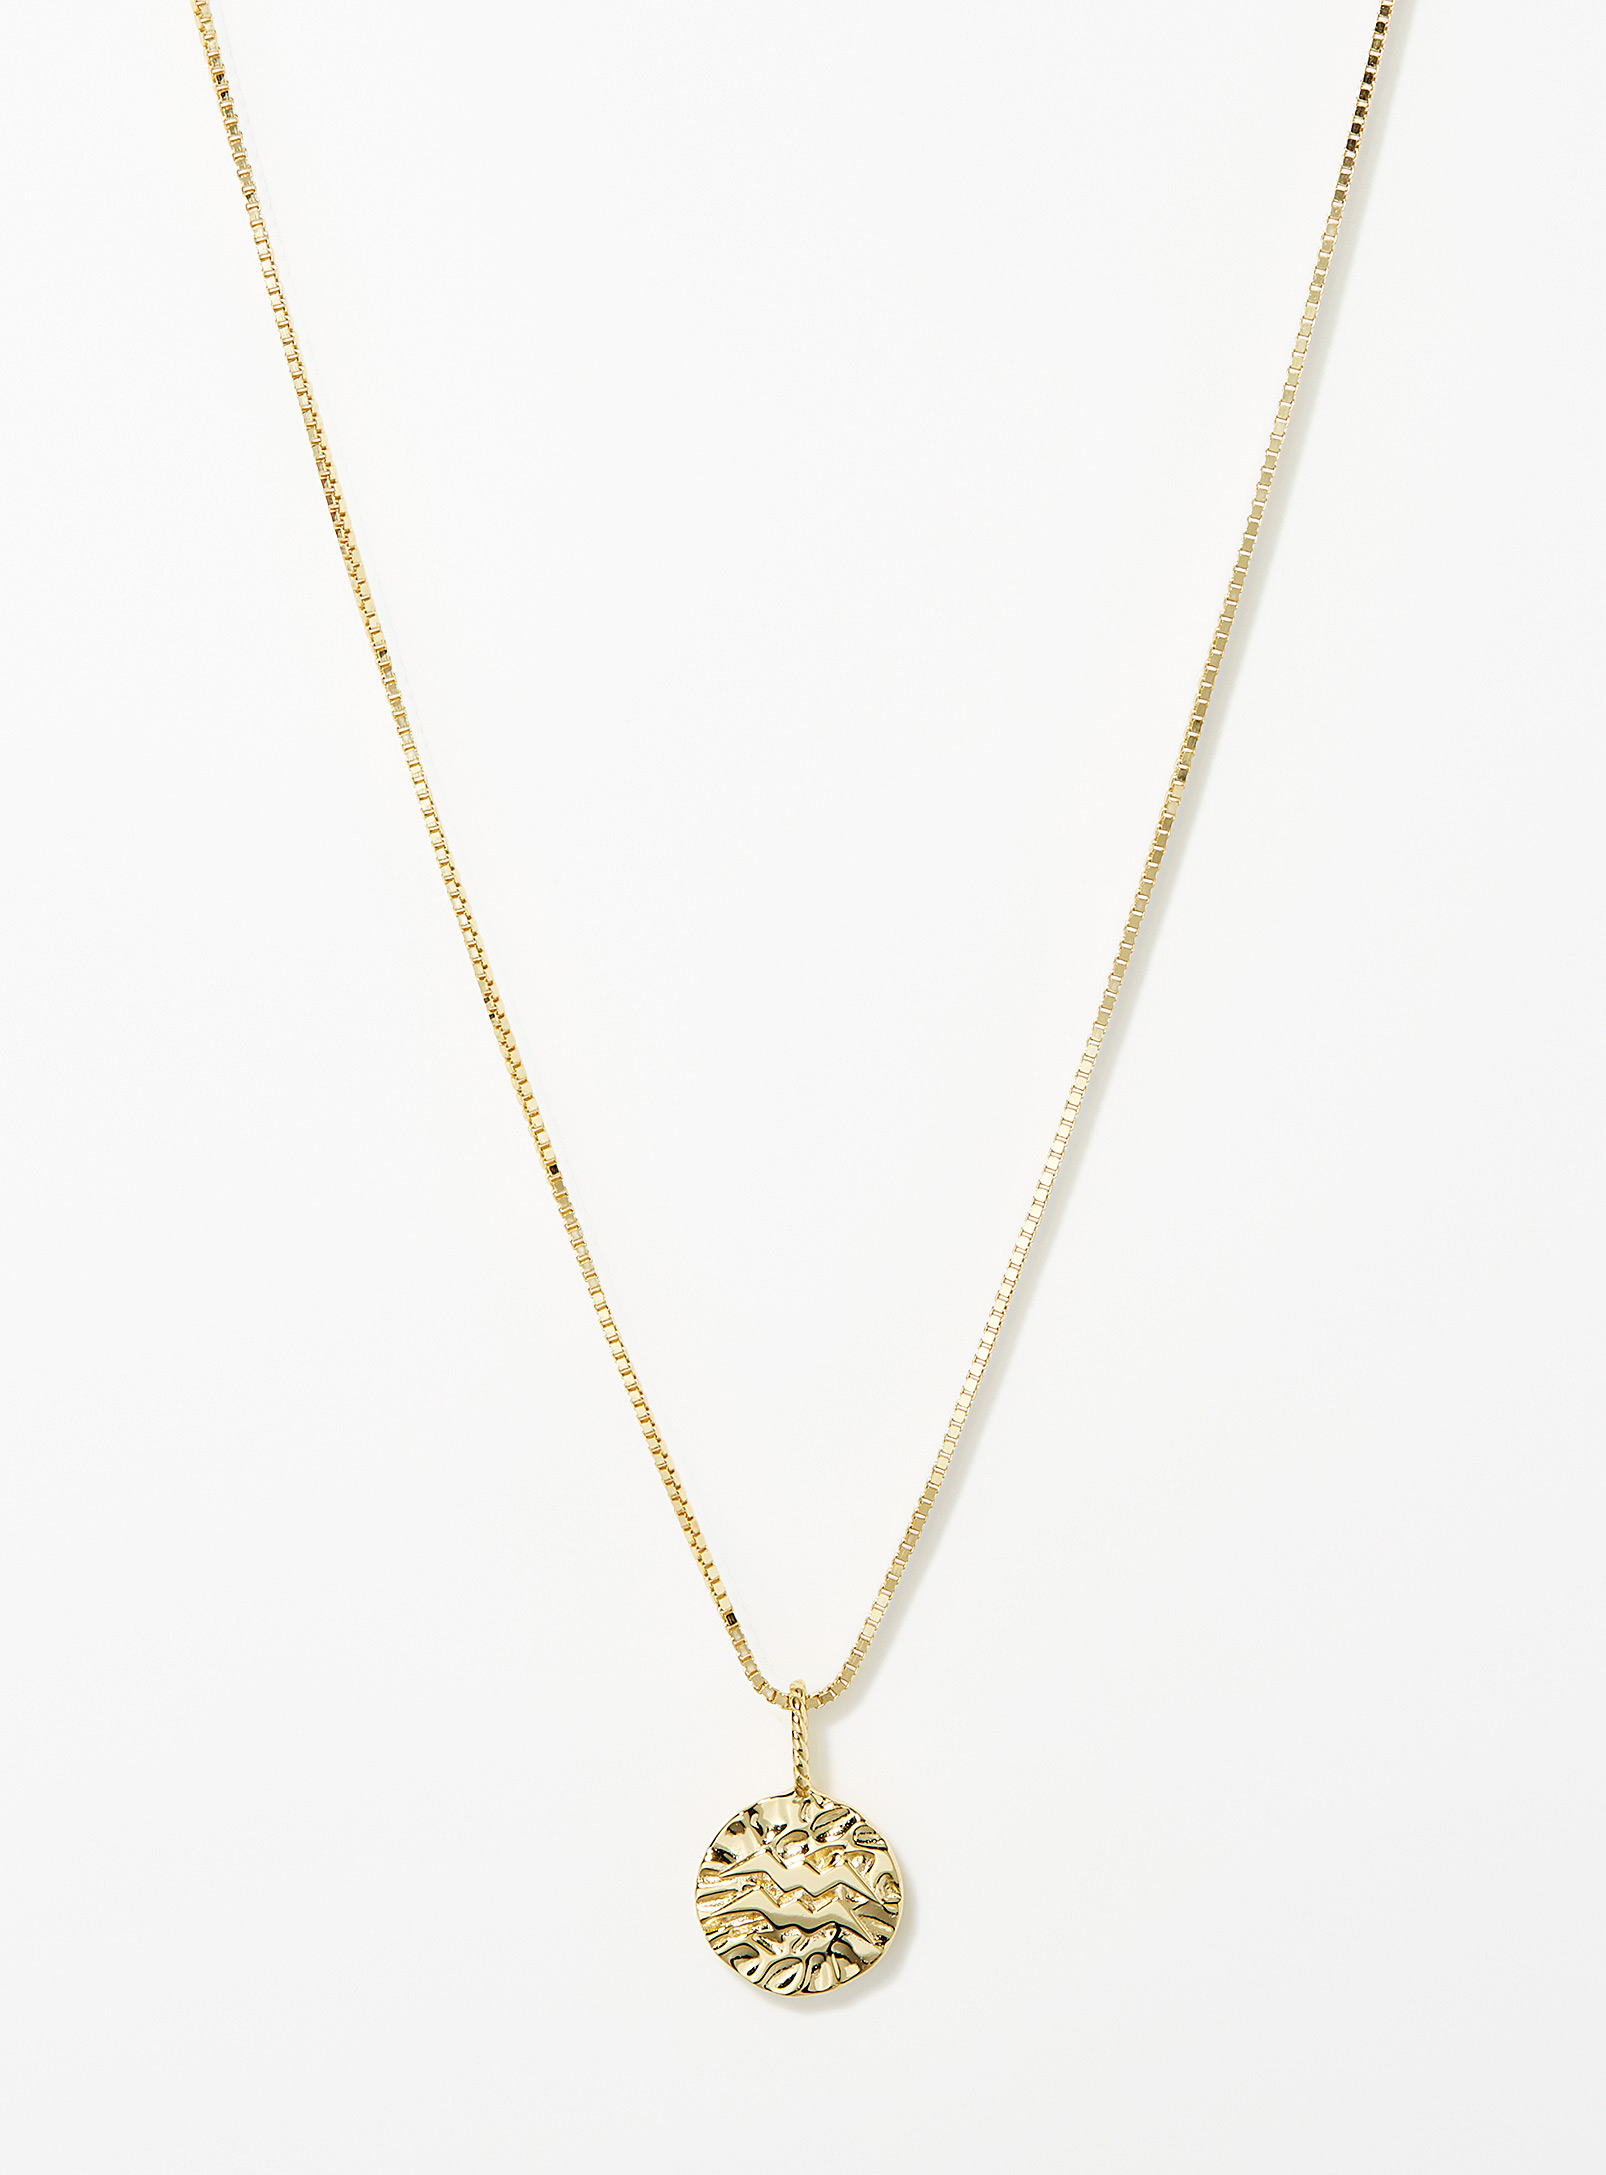 Midi34 X Simons Shimmery Astro Necklace In Oxford